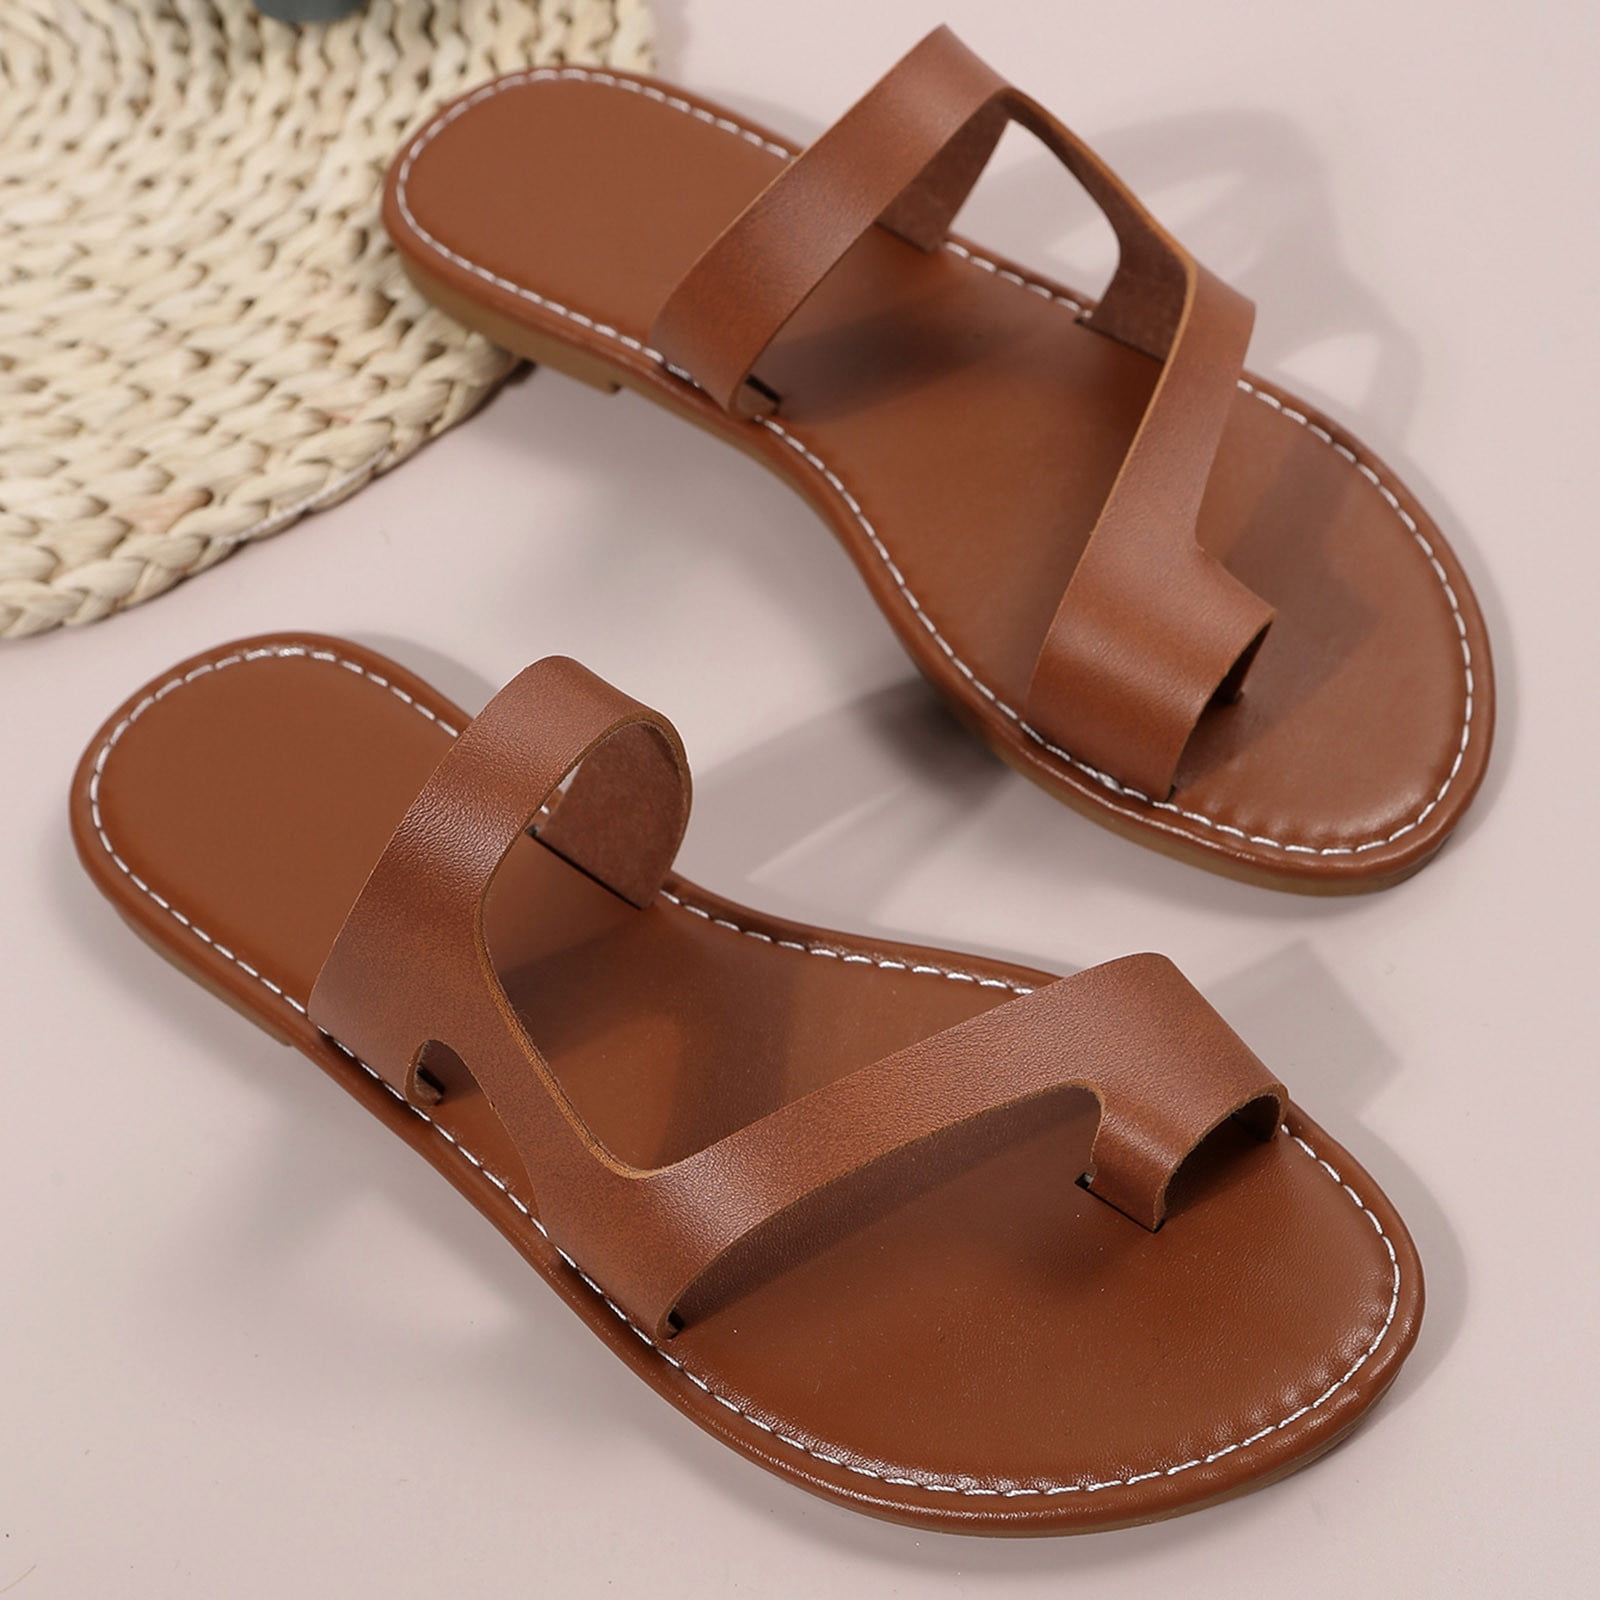 🌼 Closed Toe Ankle Strap Flat Sandals | Shopee Philippines